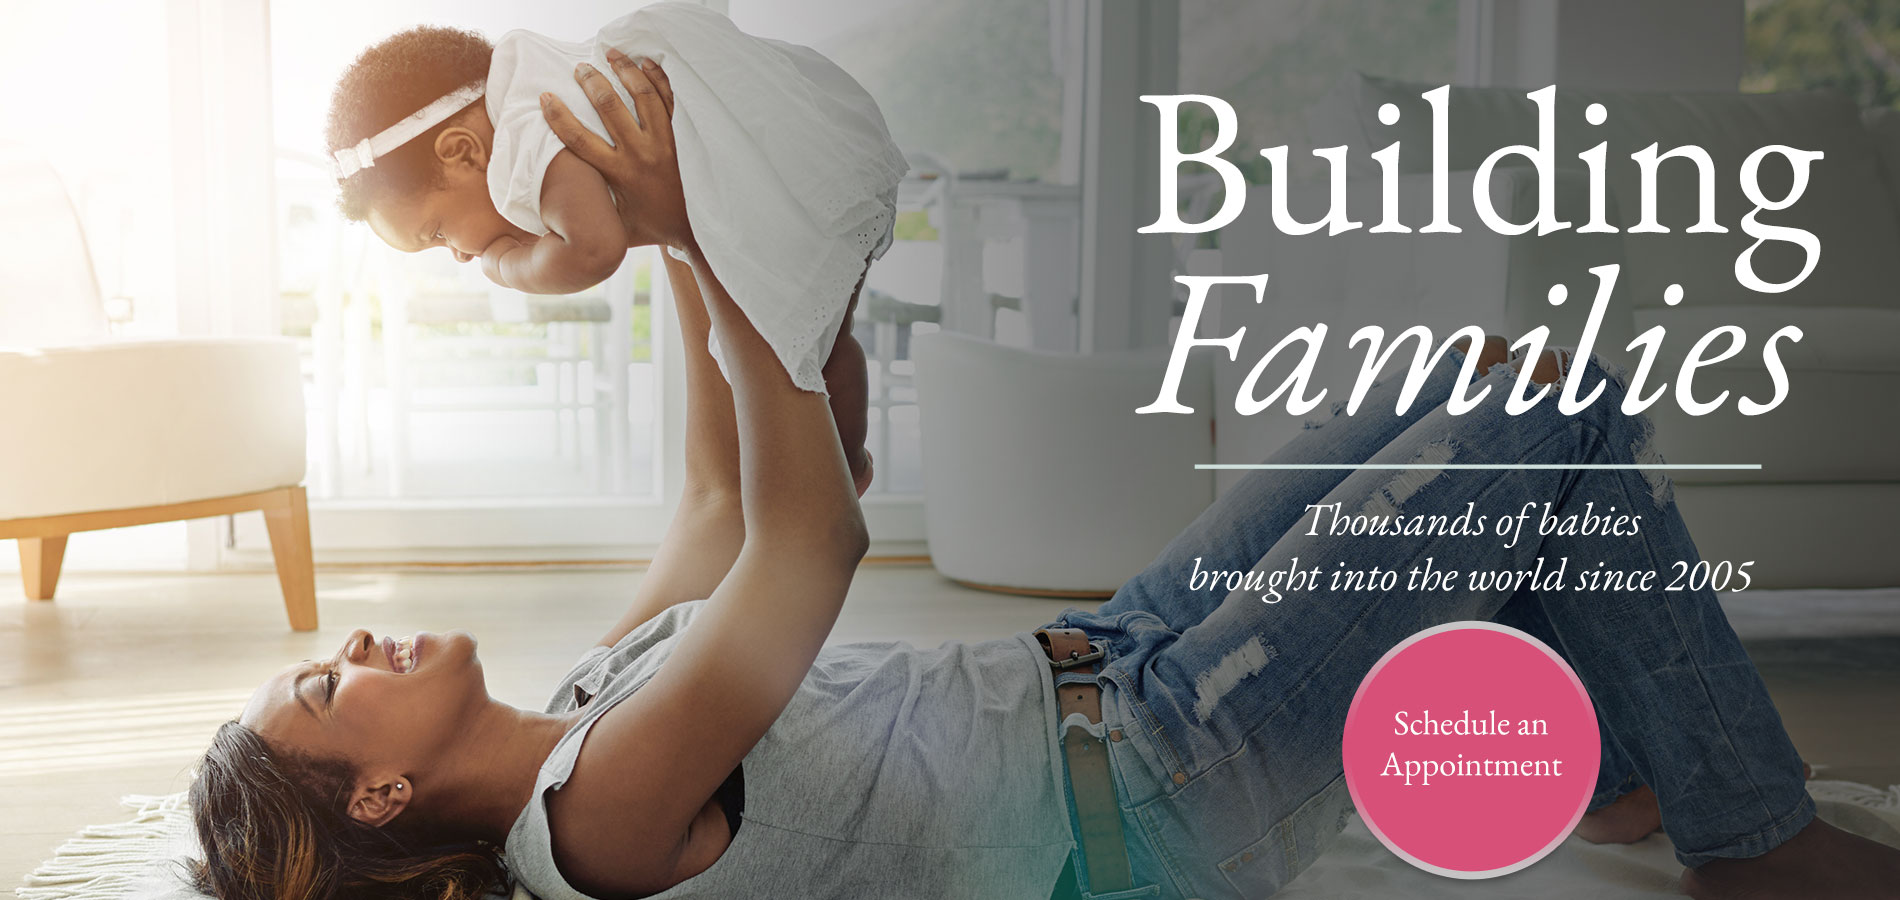 Building Families - Thousands of babies  brought into the world since 2005